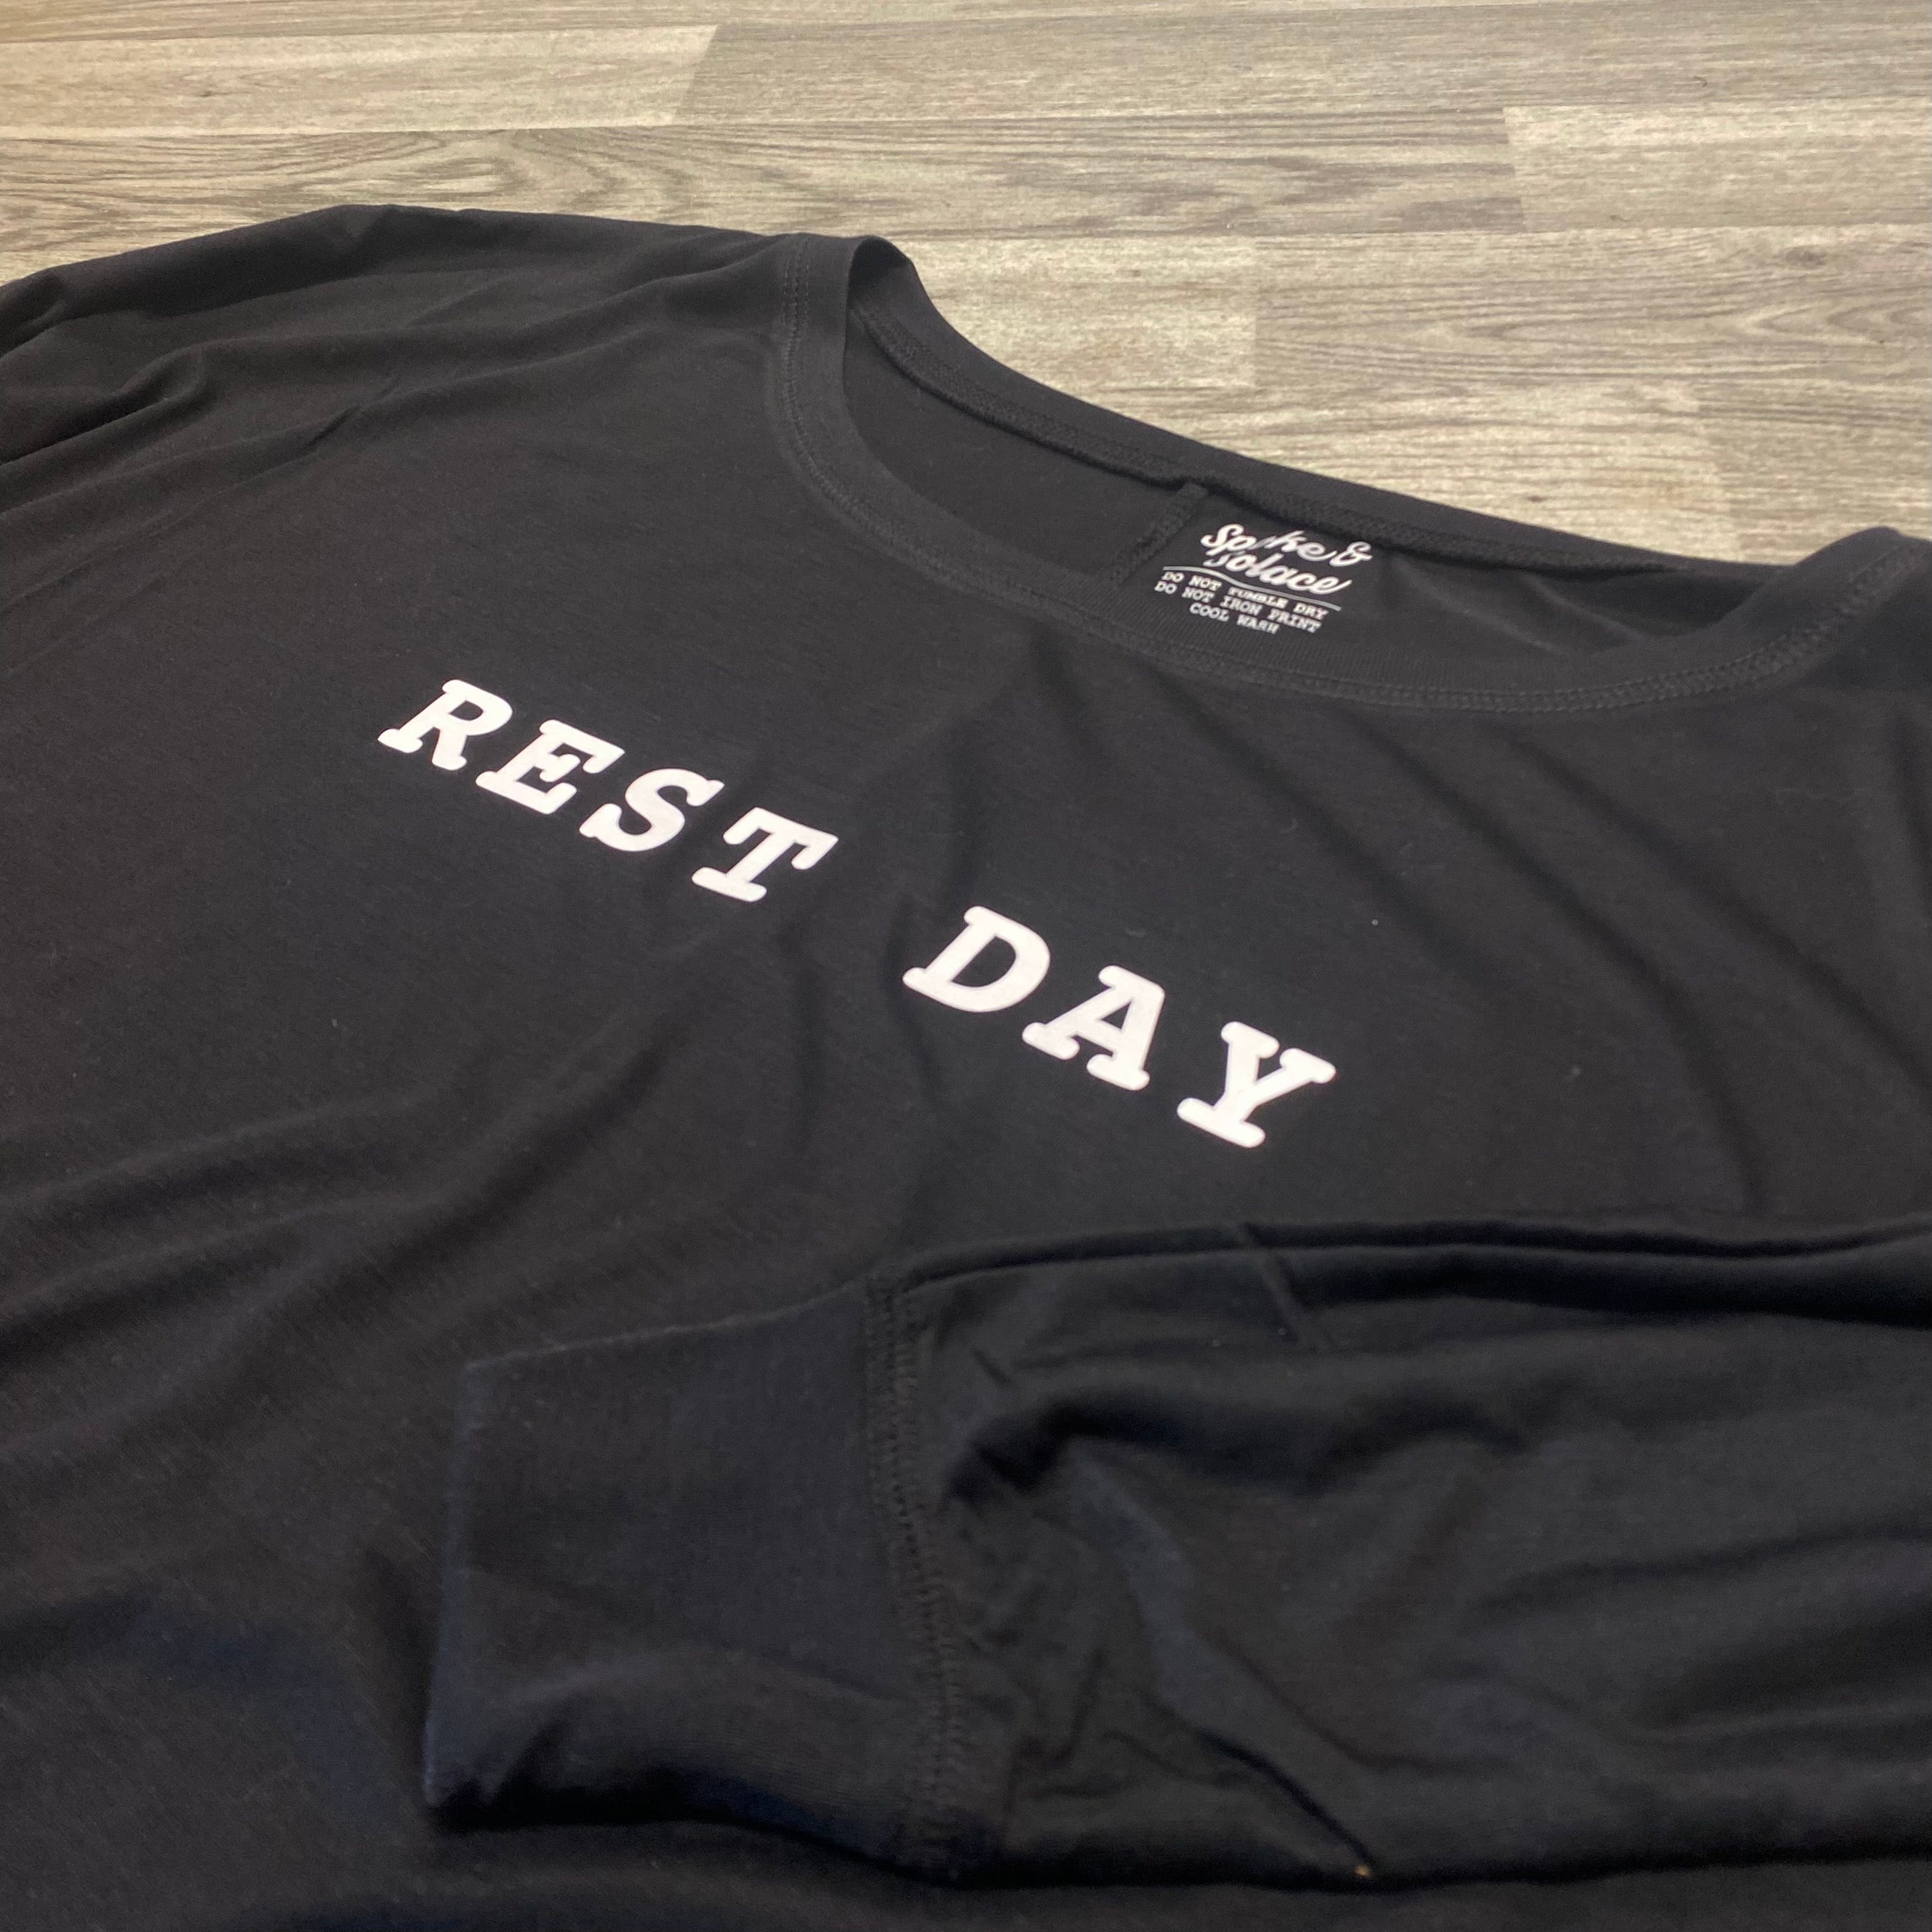 Women's Rest Day Long Sleeve Lounge Tee - Discontinued Style - Spoke & Solace